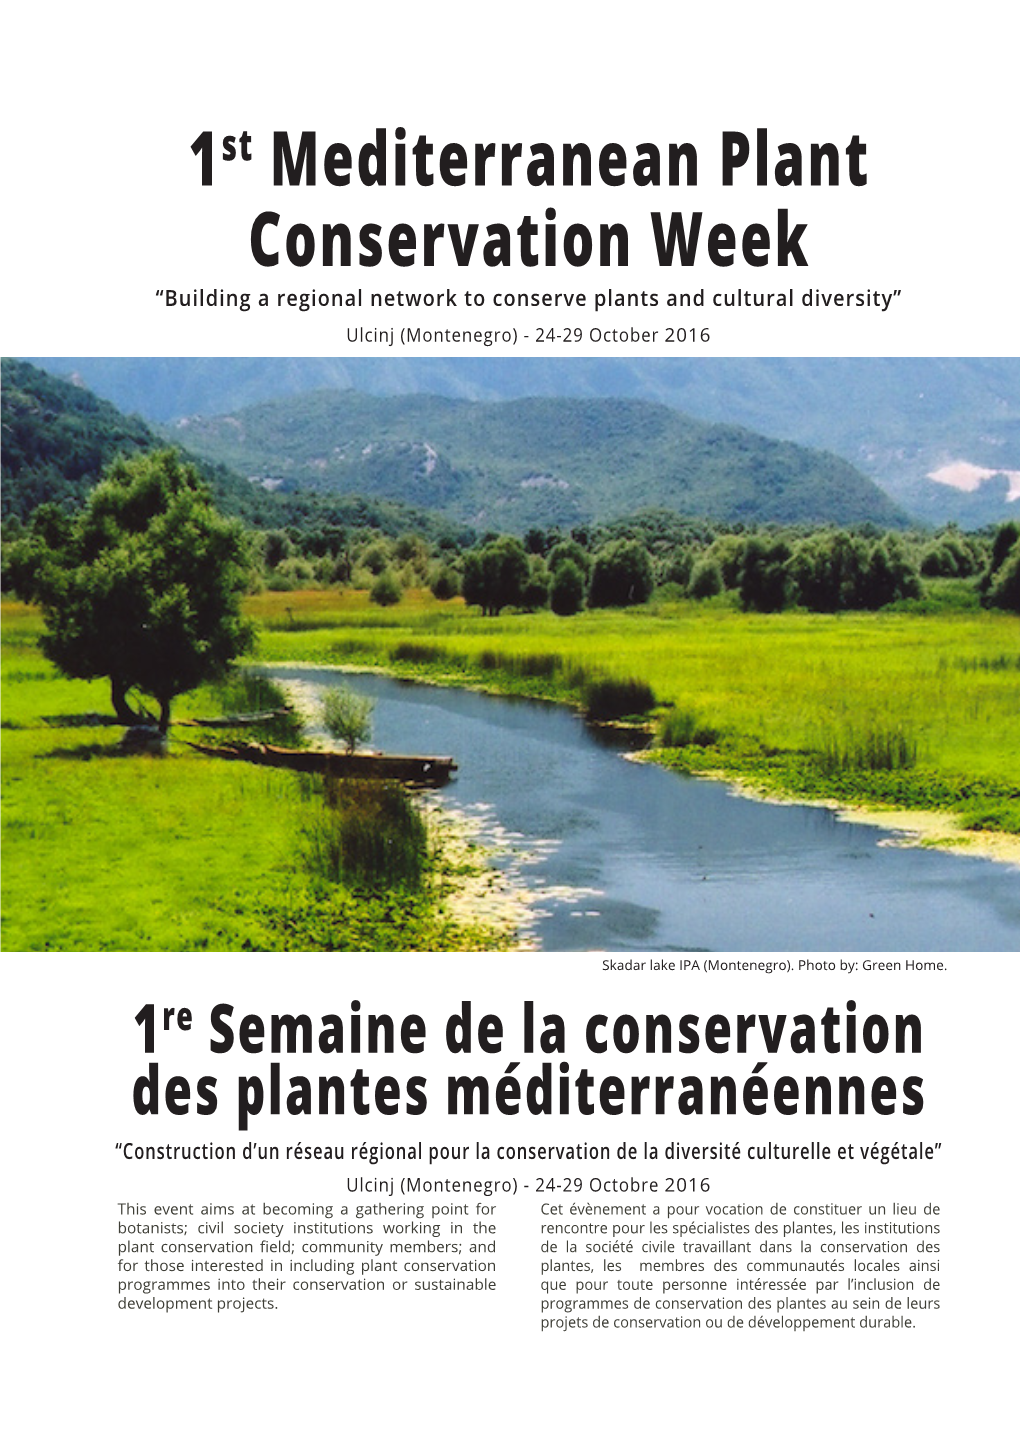 1St Mediterranean Plant Conservation Week “Building a Regional Network to Conserve Plants and Cultural Diversity” Ulcinj (Montenegro) - 24-29 October 2016